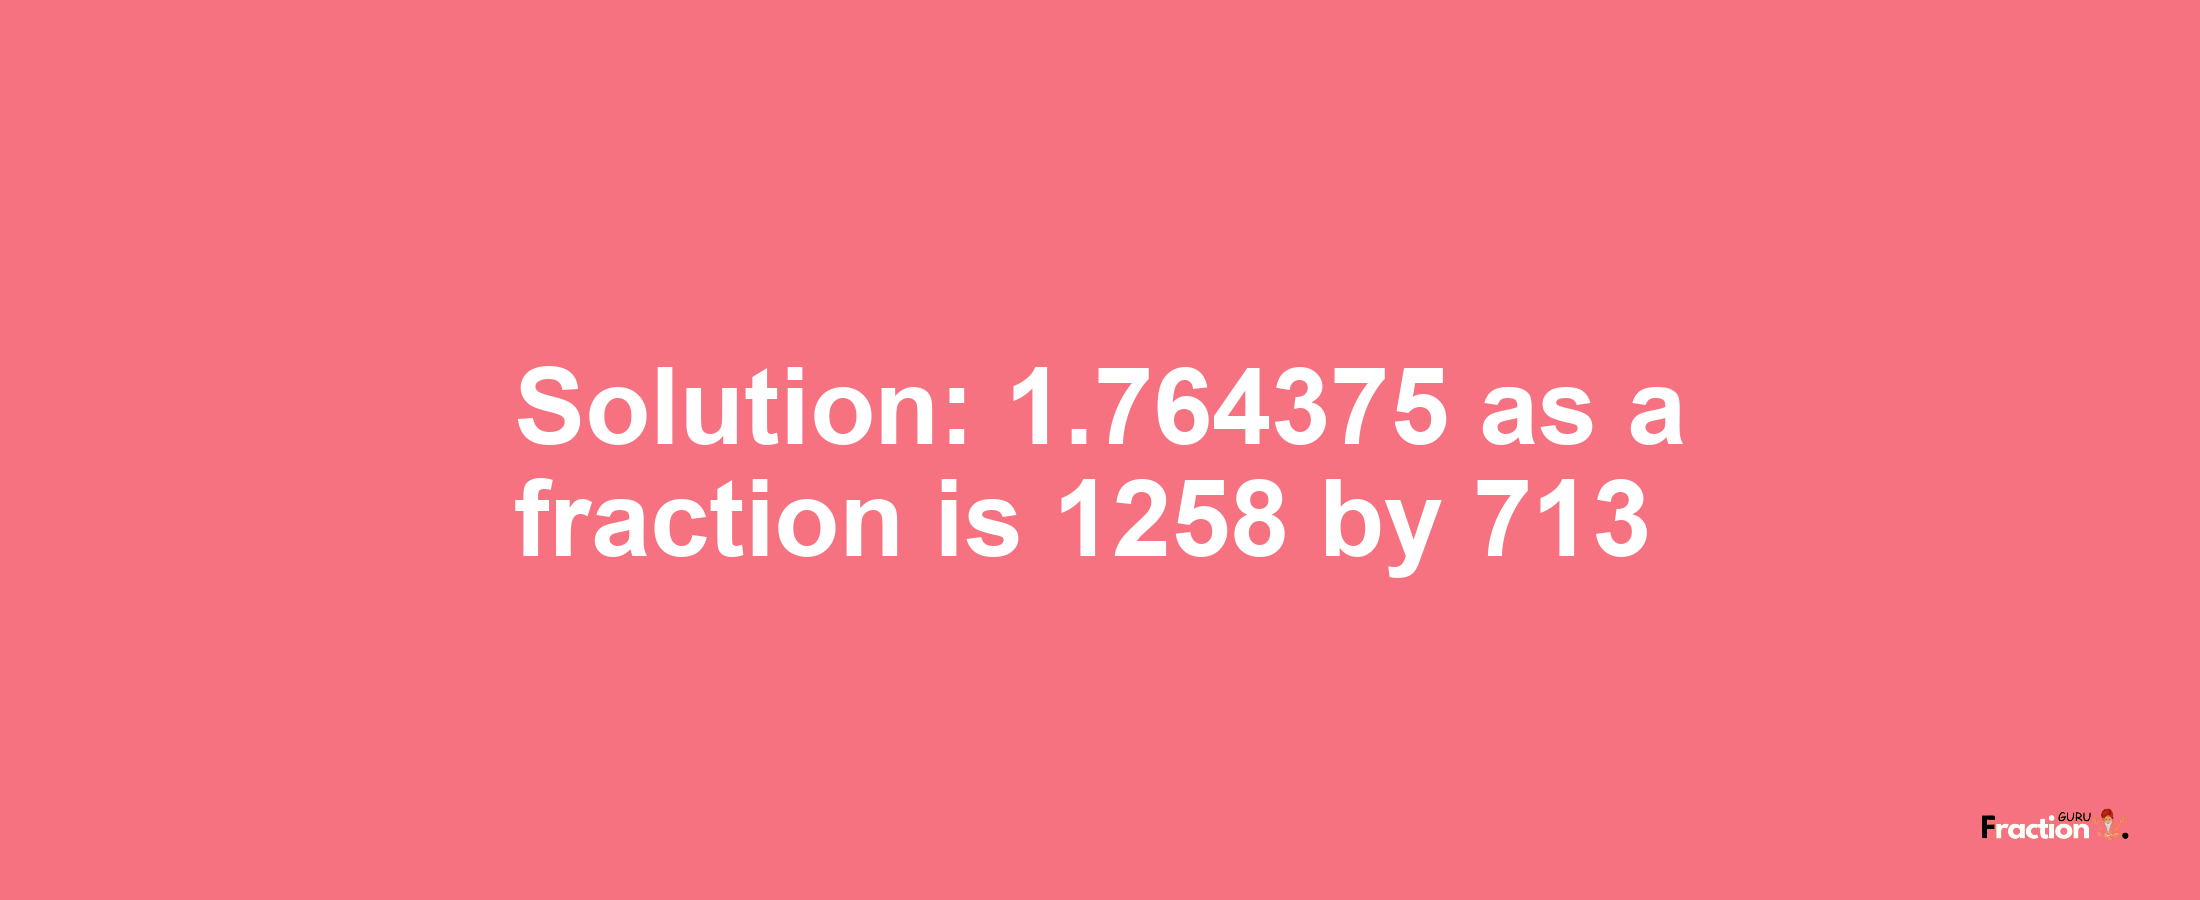 Solution:1.764375 as a fraction is 1258/713